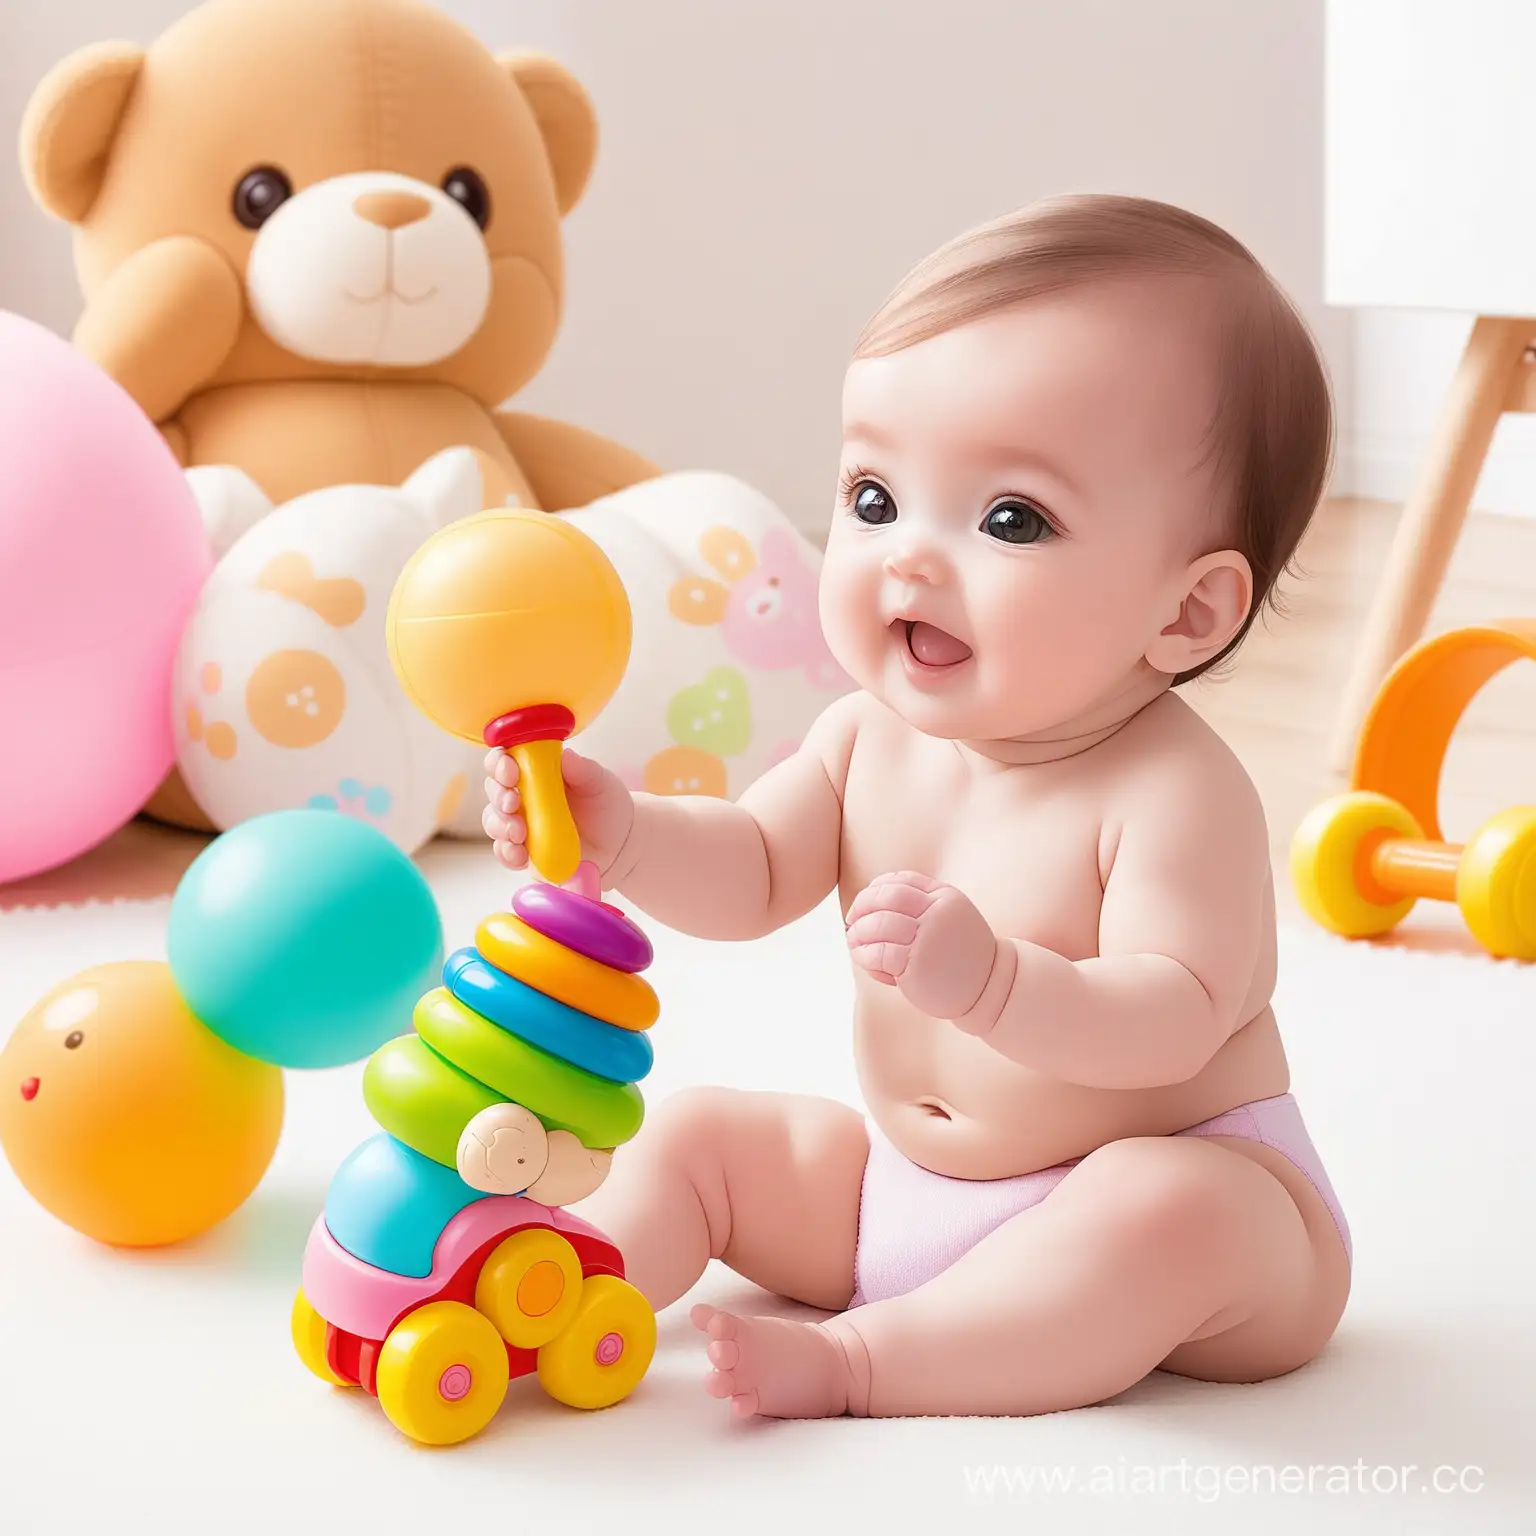 Colorful-Baby-Toys-Arranged-in-Playful-Display